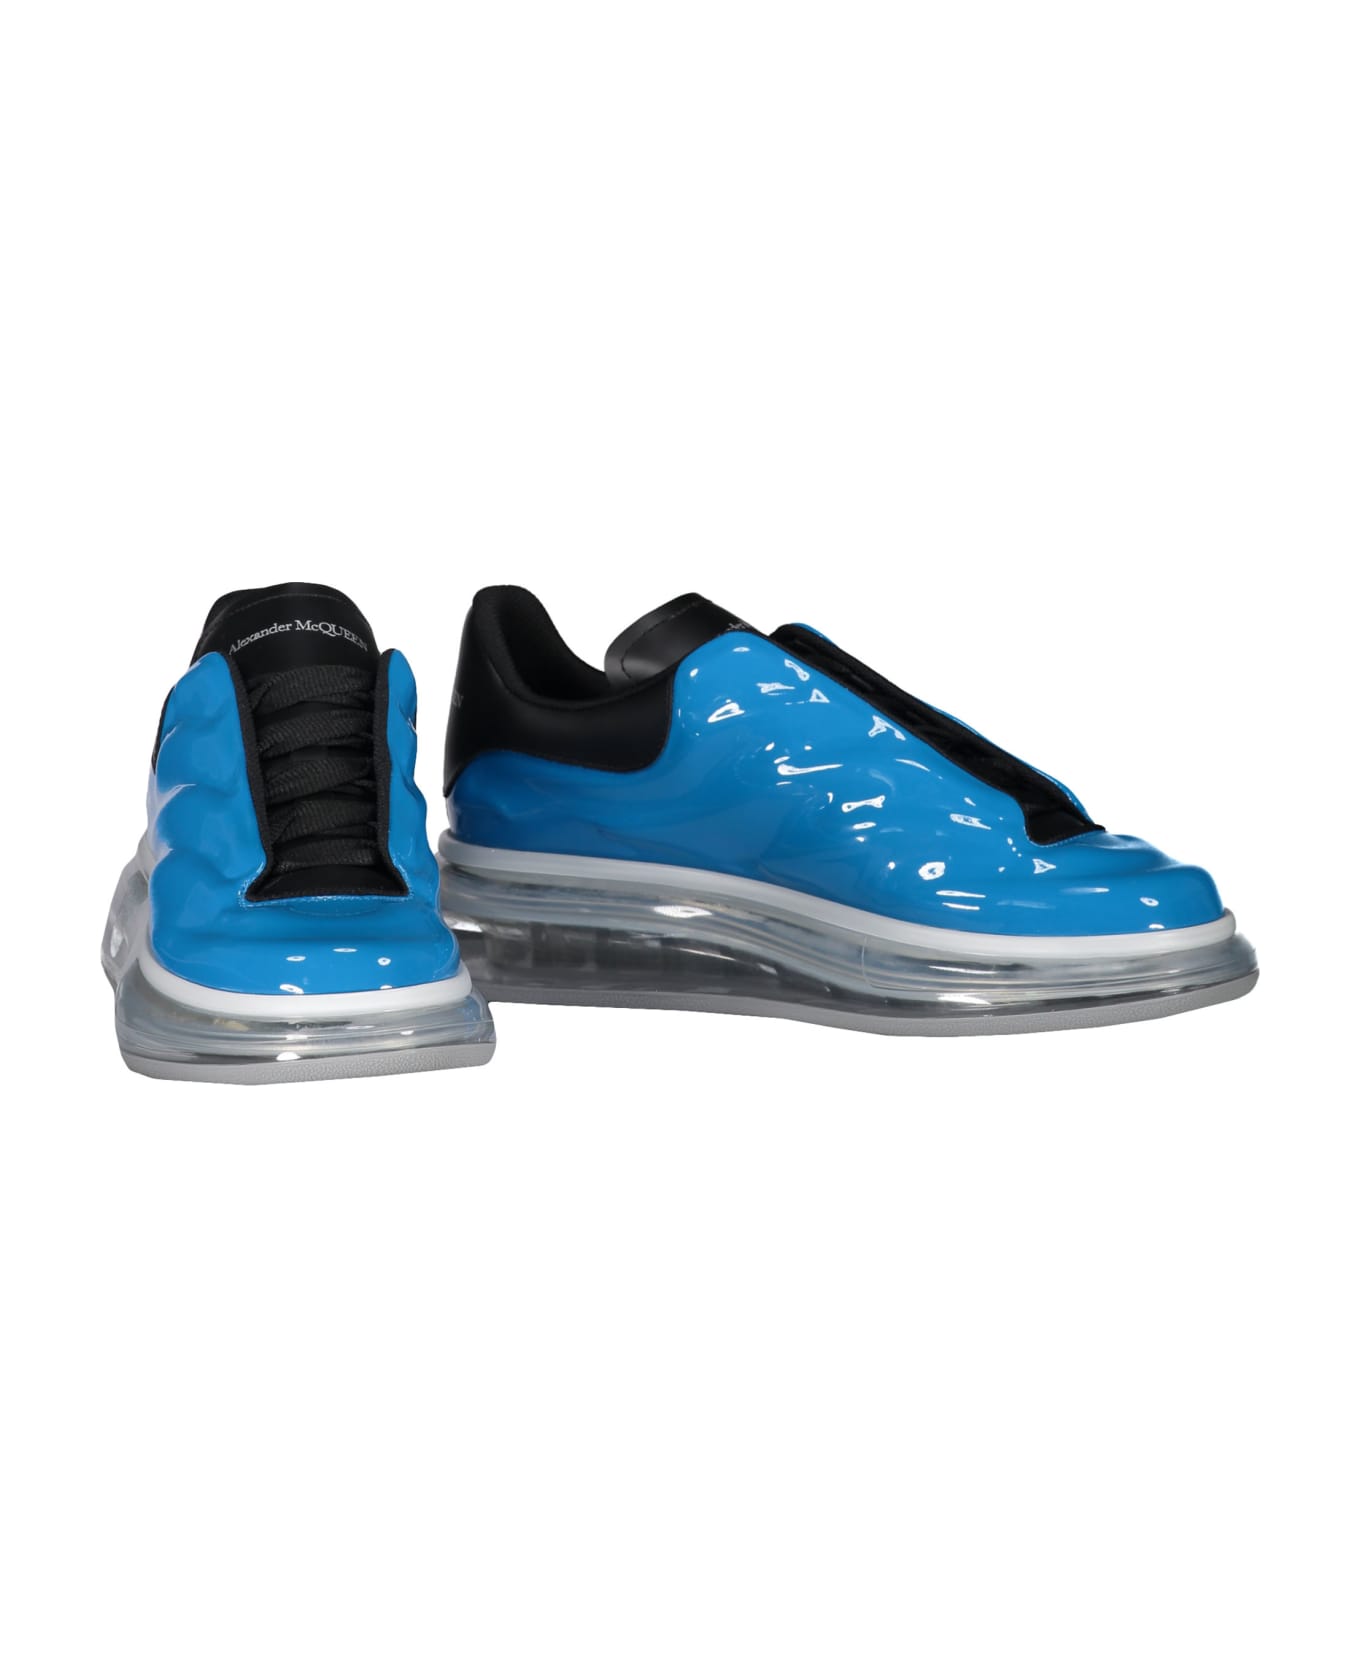 Alexander McQueen Gloss Lux Chunky Sneakers - blue